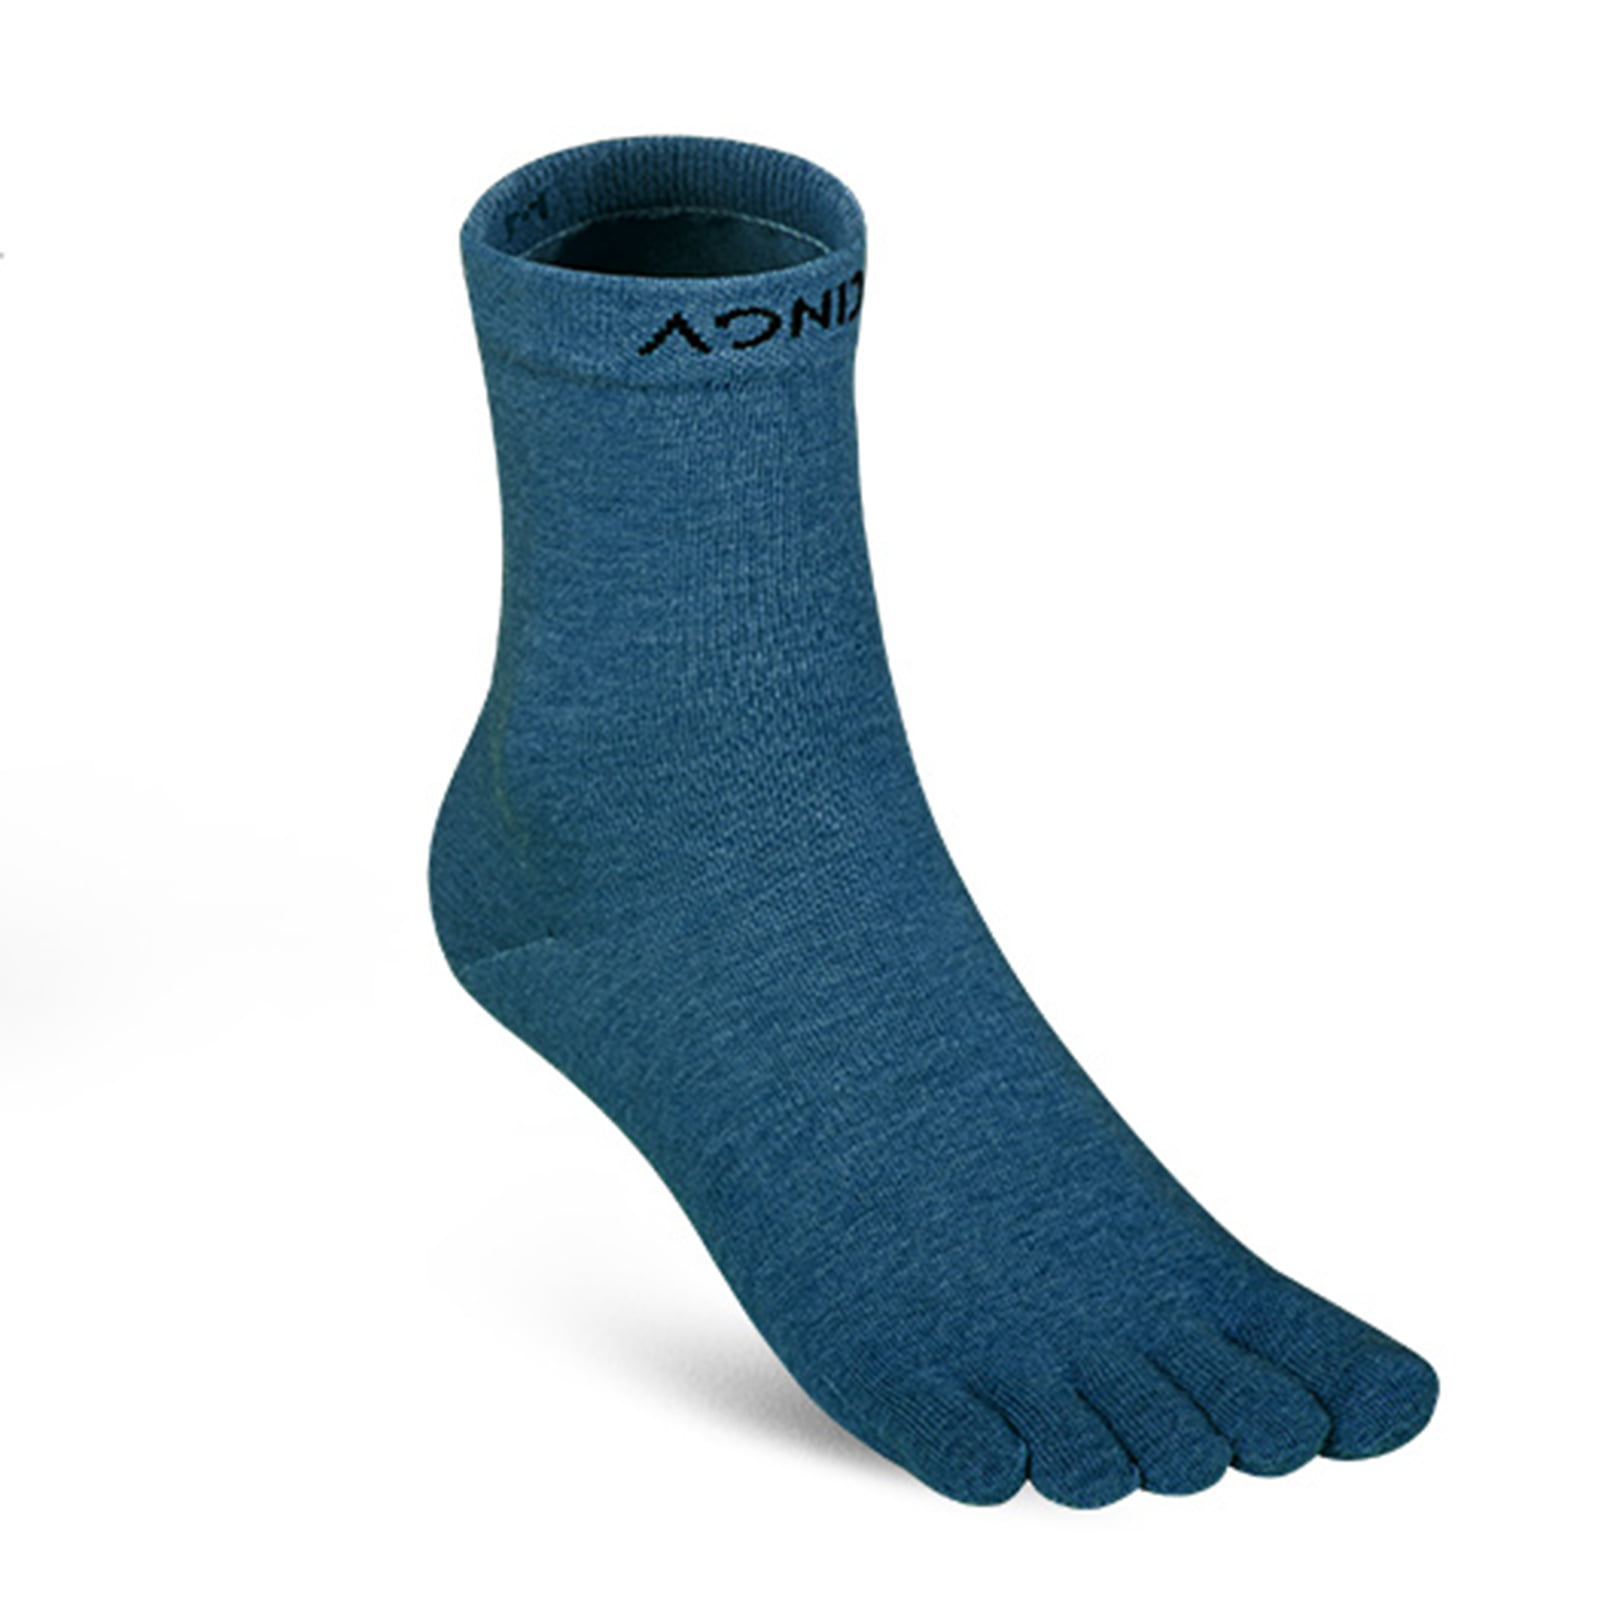 AONIJIE Socks for Men and Women High Performance Athletic Toe-Socks Soft,Comfortable and Breathable 